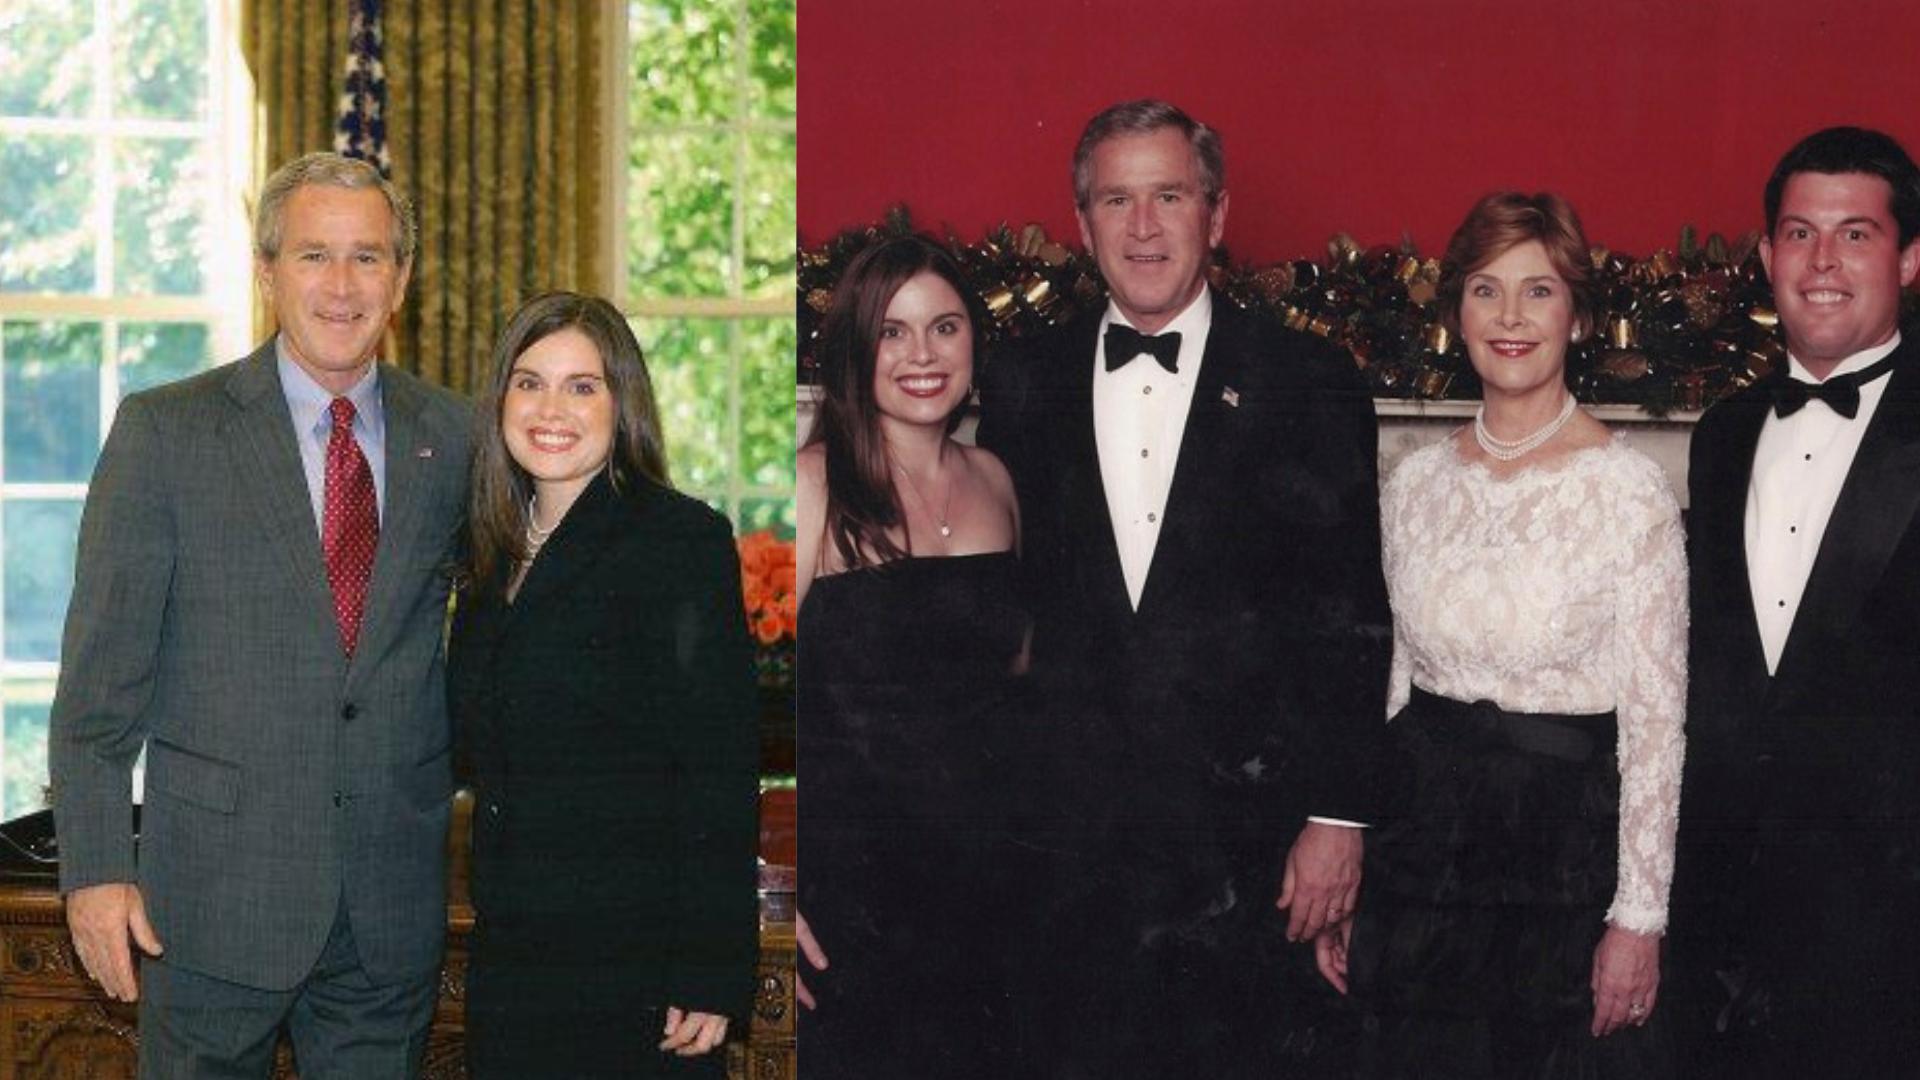 Left: Judd is photographed in the Oval Office with President George W. Bush. Right: Judd and her brother, Jed Douglas, are pictured with President and First Lady Bush at the annual Congressional Ball. 